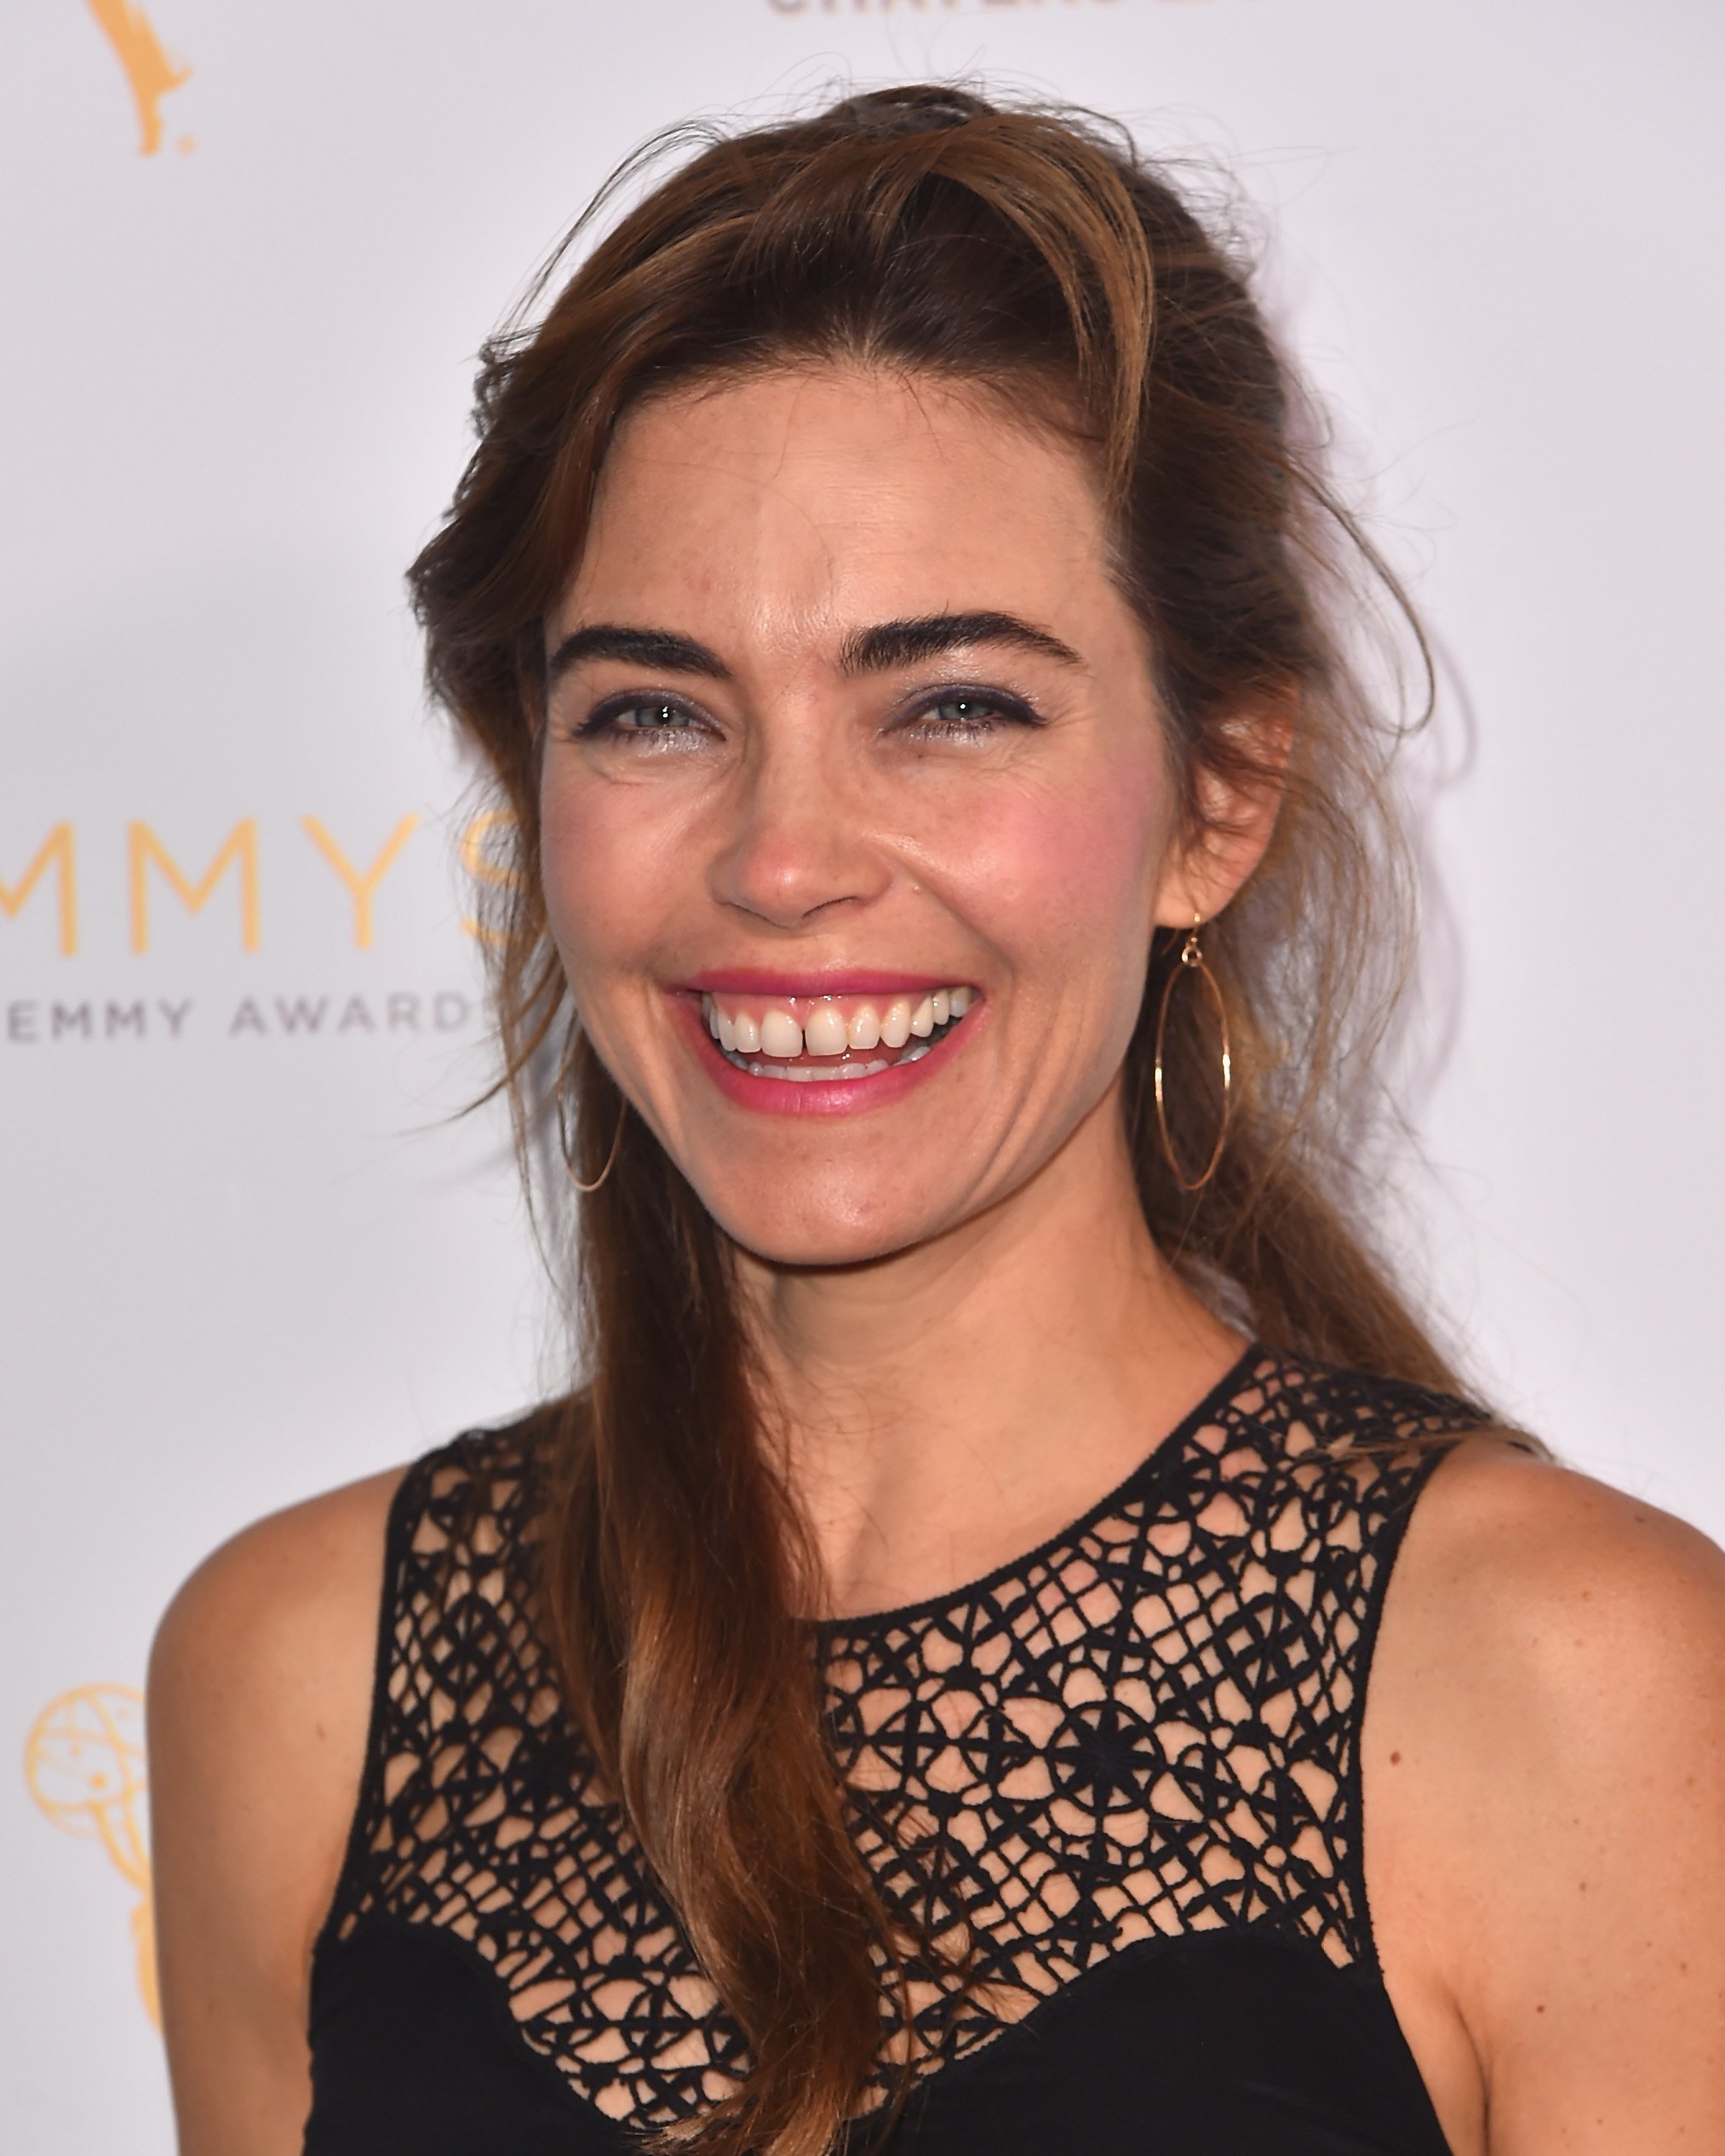 Amelia Heinle attends a cocktail reception hosted by the Academy of Television Arts & Sciences celebrating the Daytime Peer Group. | Source: Getty Images